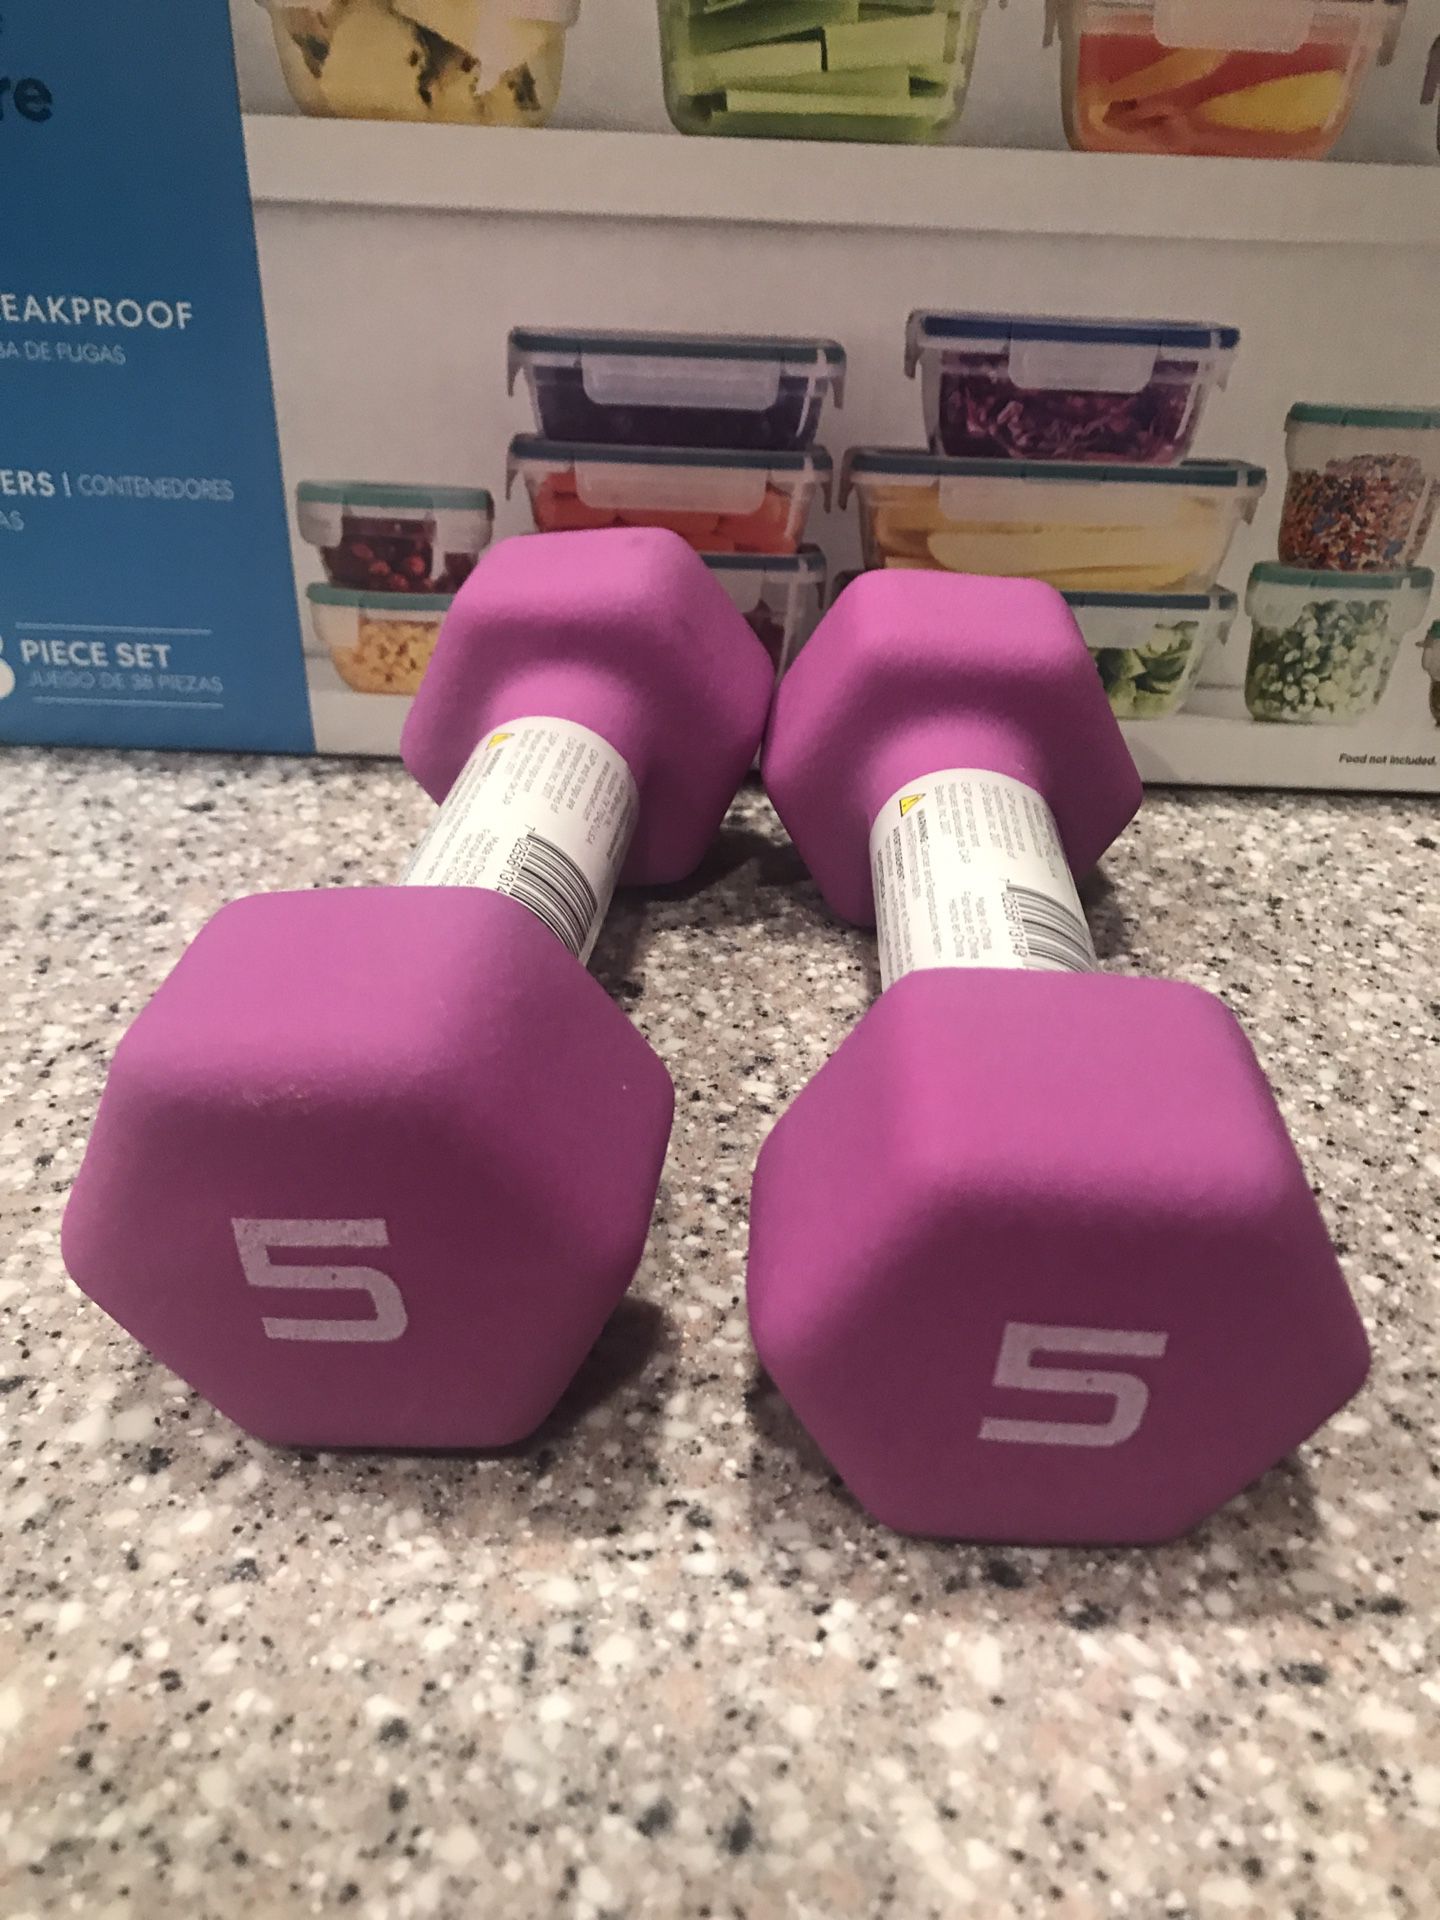 New set of Dumbbells 5lb’s Located in East Mesa near signal Butte and Elliot.